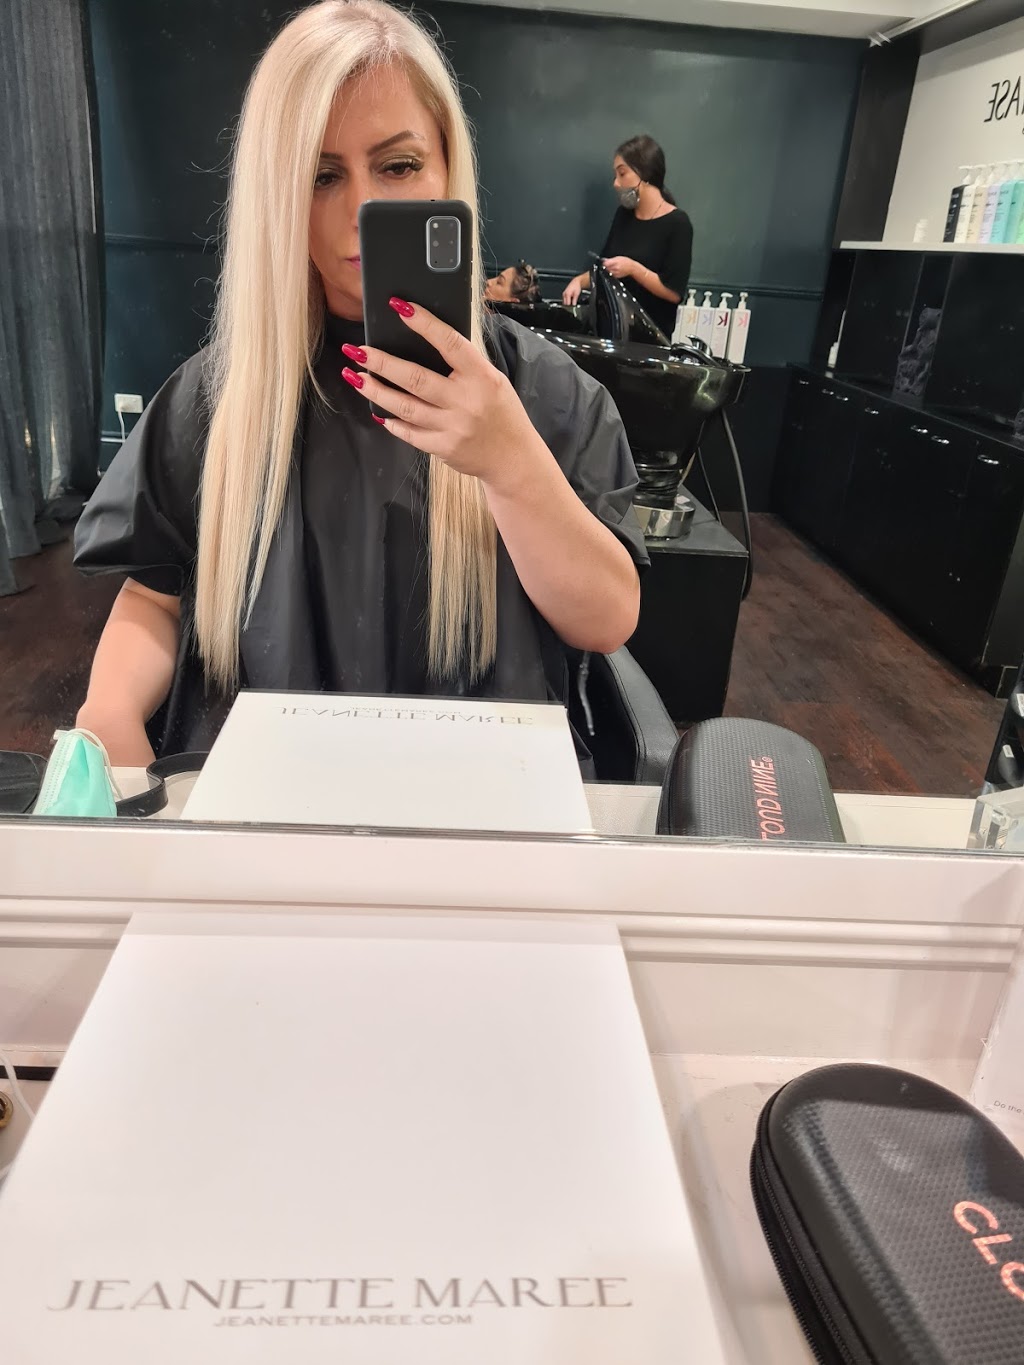 Emilly Hadrill Hair & Extensions Melbourne | hair care | 61 Toorak Rd, South Yarra VIC 3141, Australia | 1300181000 OR +61 1300 181 000